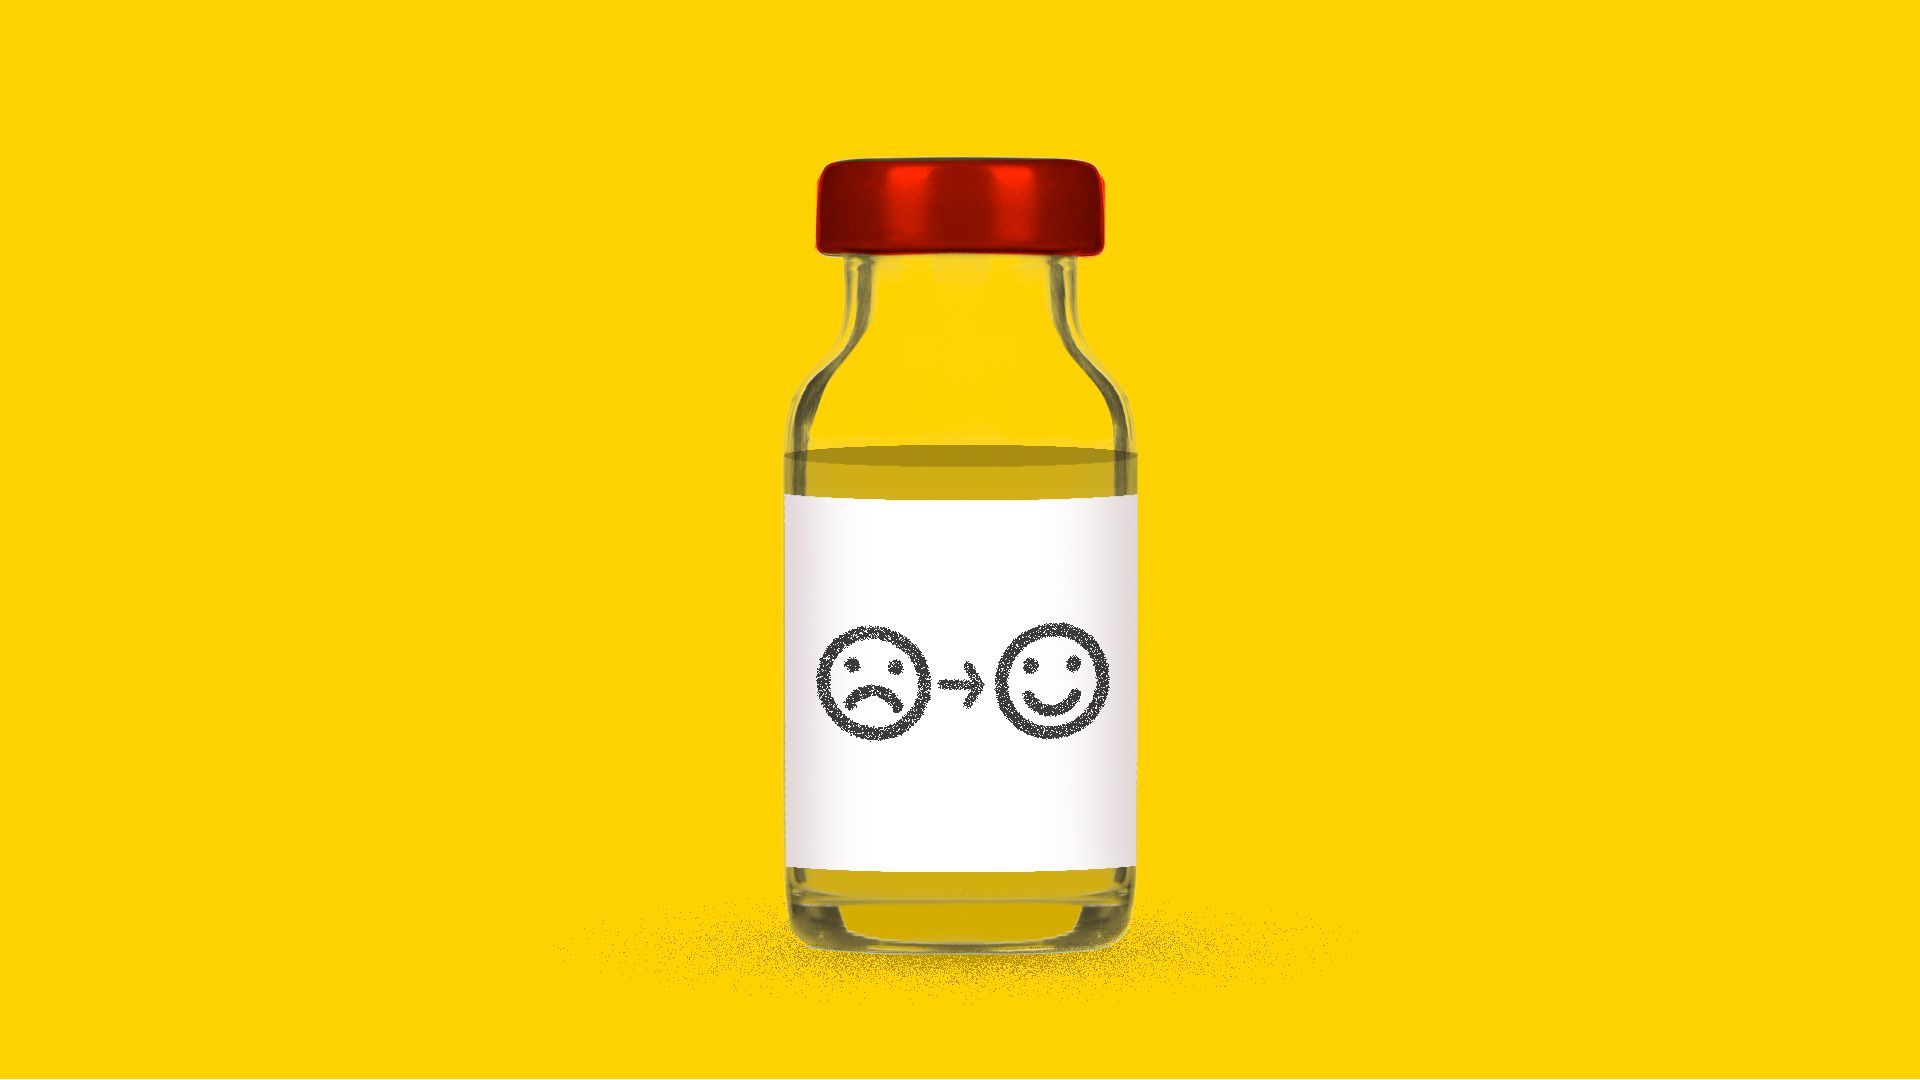 Illustration of bottle of antidepressant drug Ketamine with a sad face turning into a happy face.